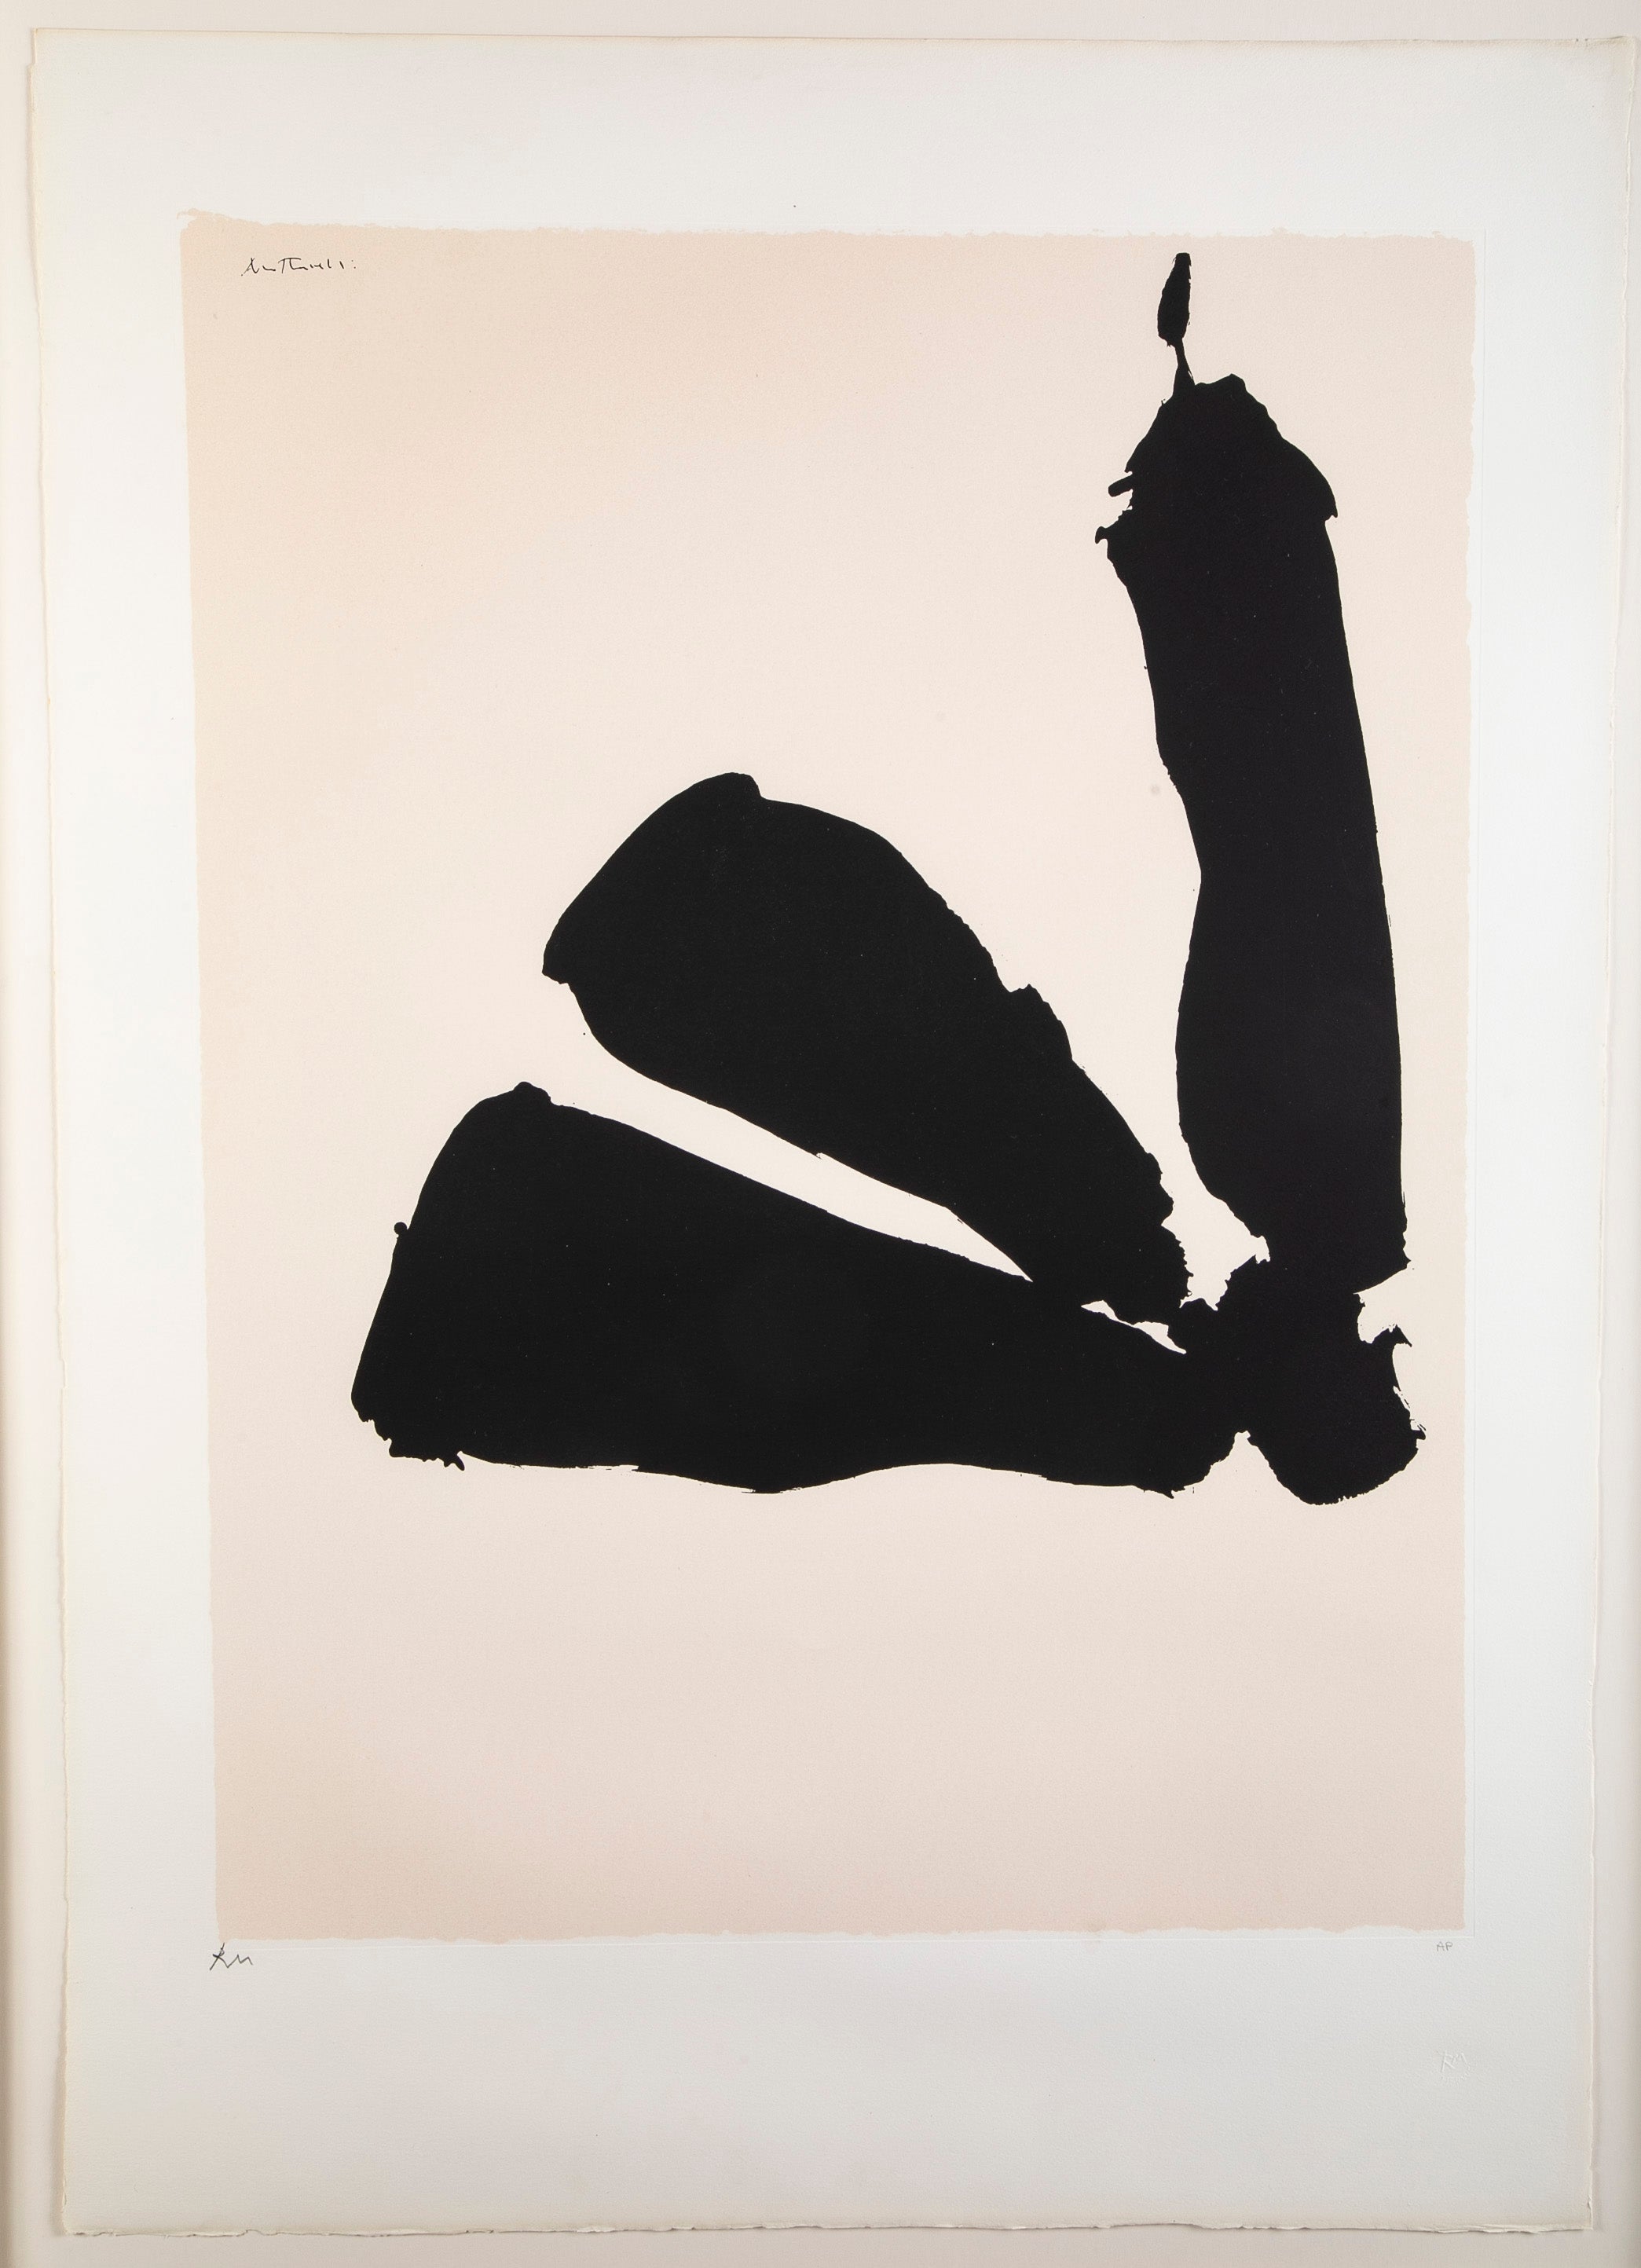 "Africa Suite 8" by Robert Motherwell